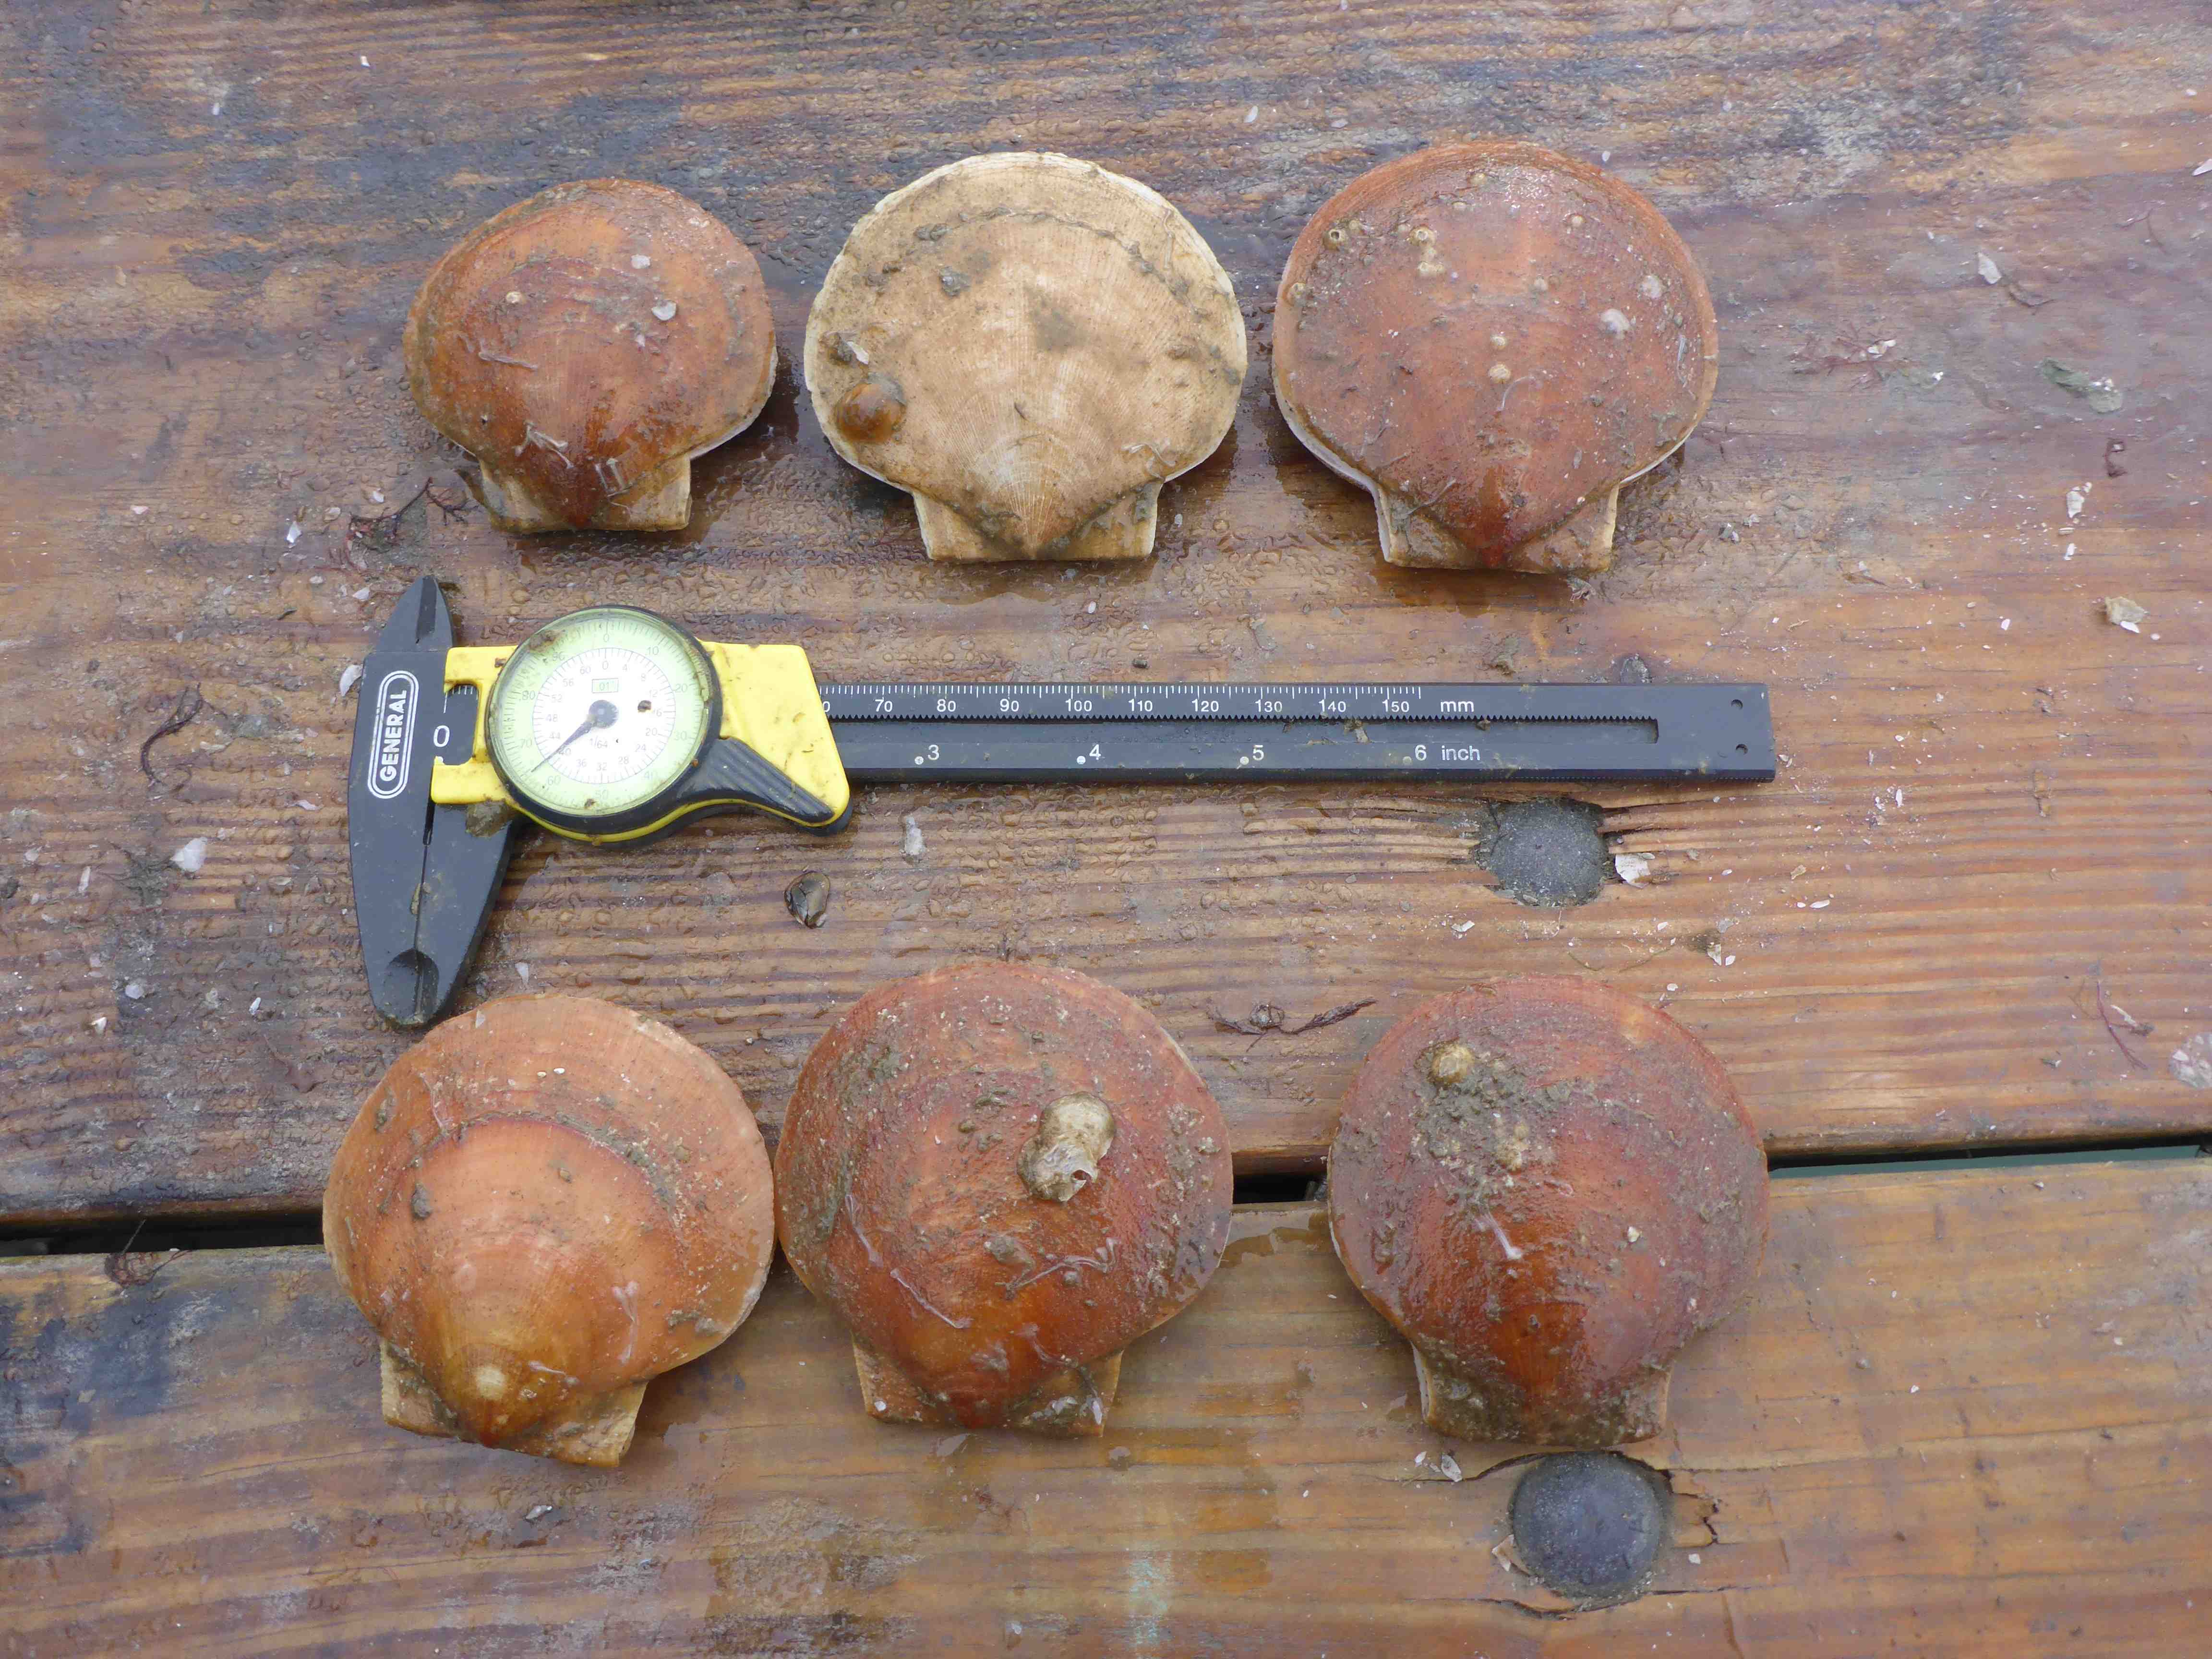 Six brown scallops on a wooden dock with measuring tool